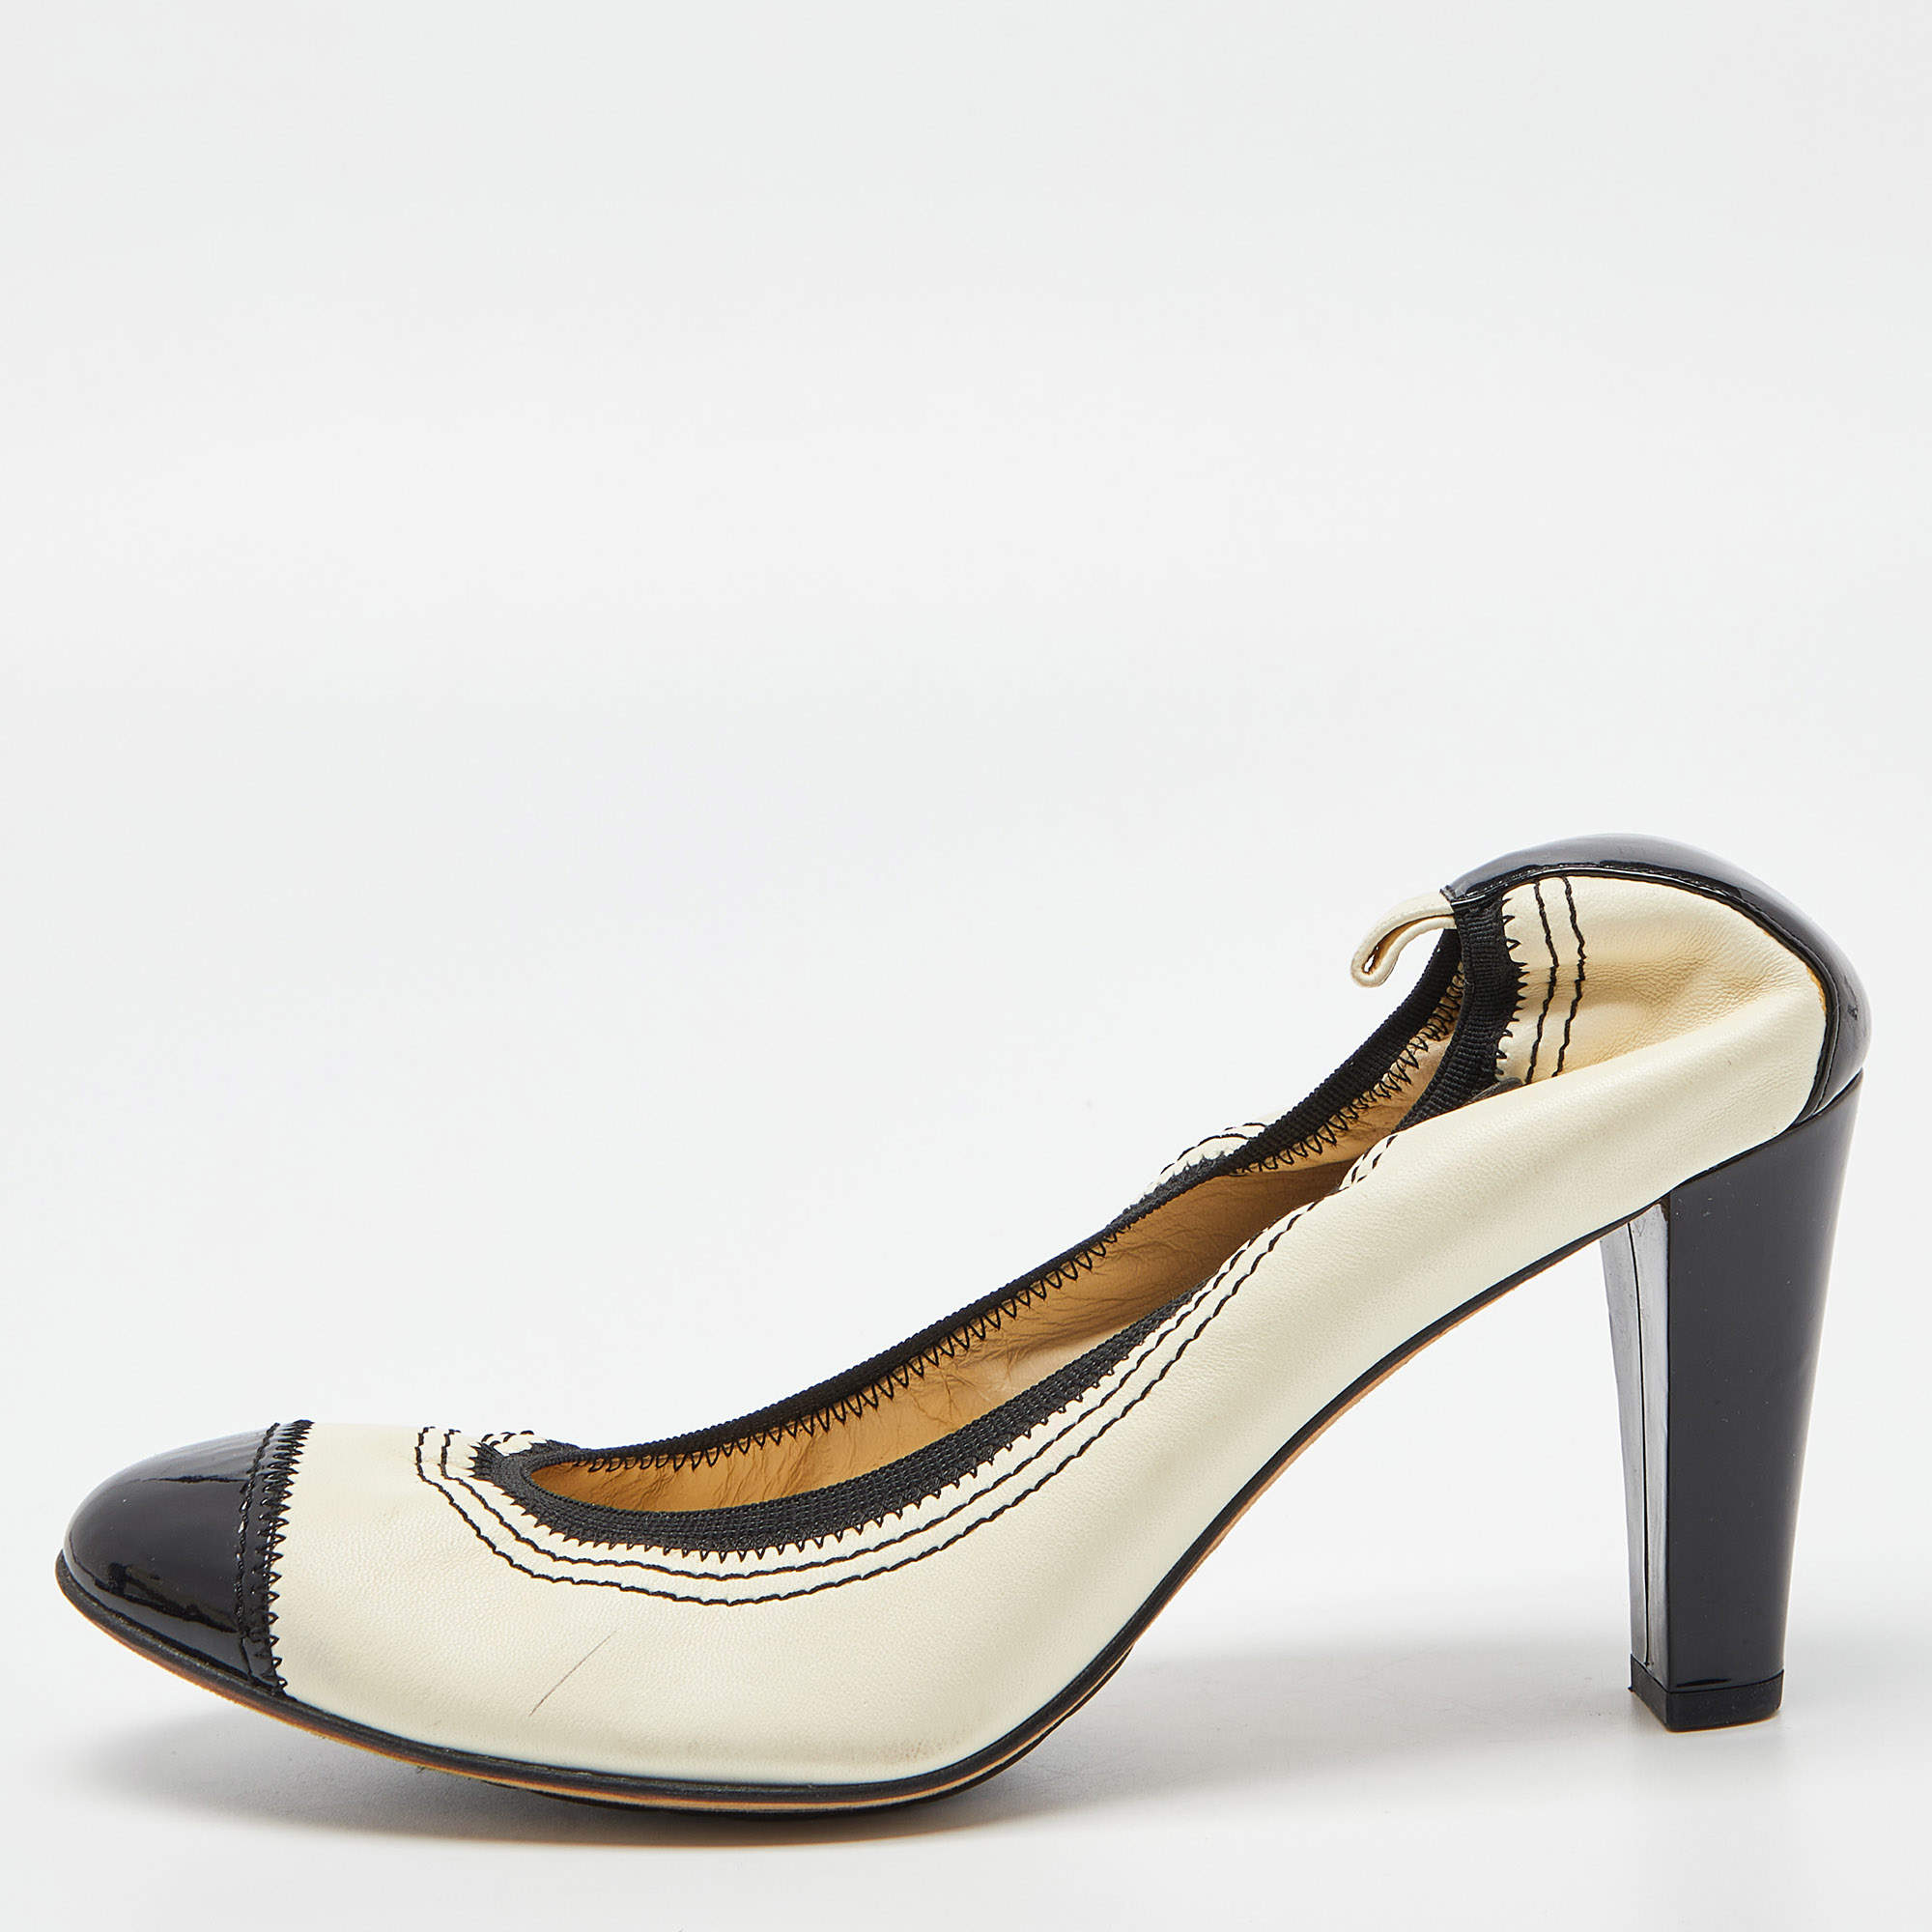 chanel patent leather ballet flats